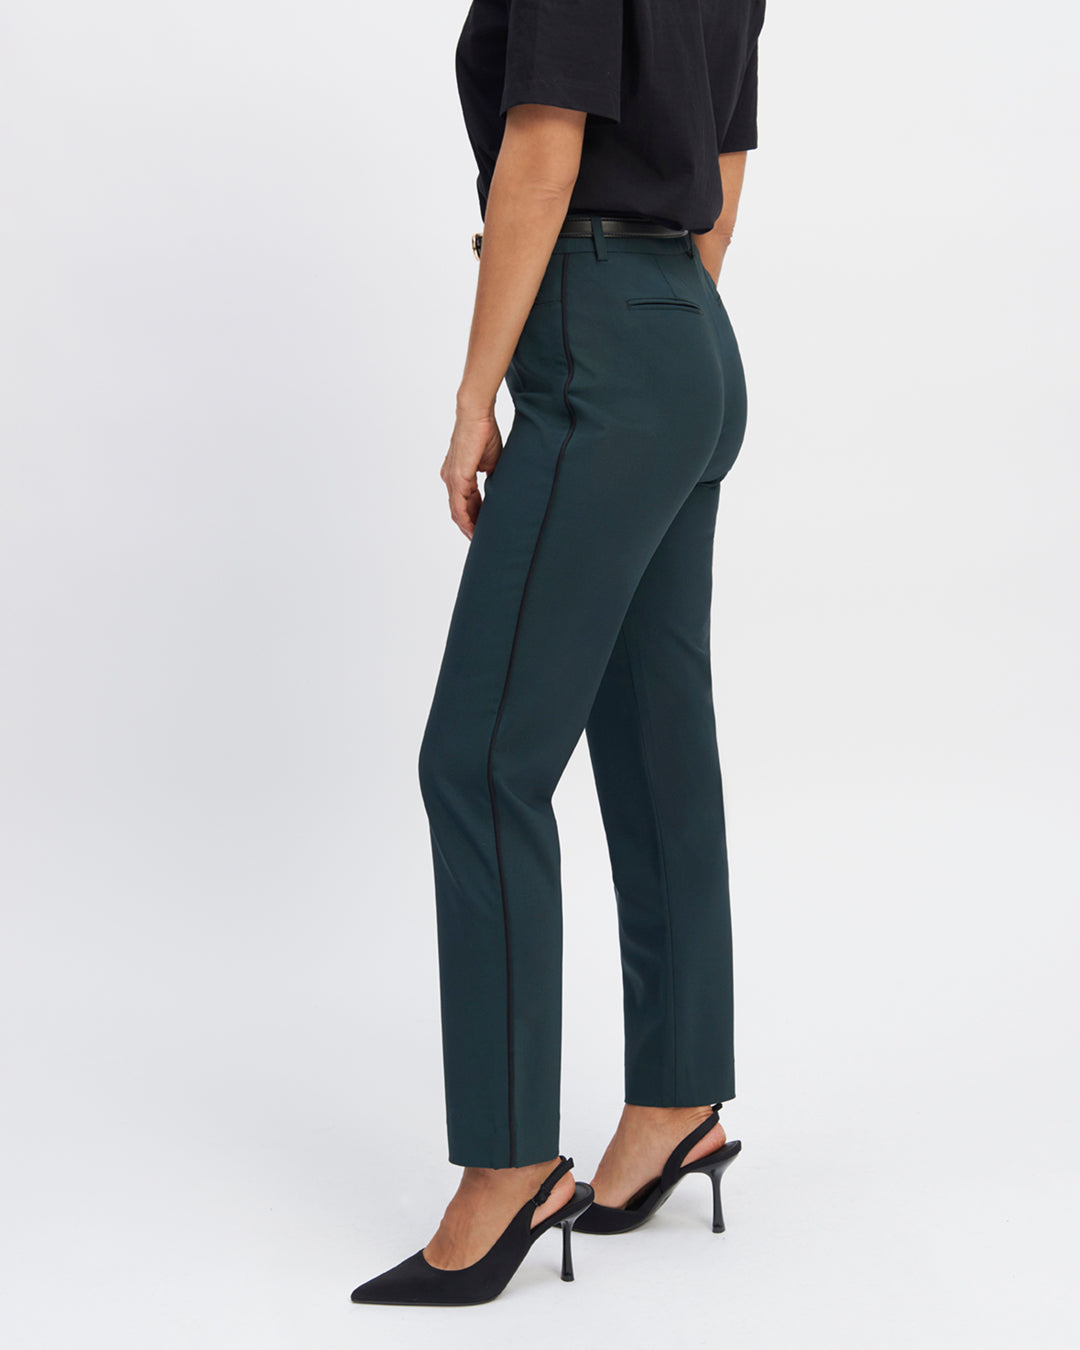 "Trouser-tailor-green-Cigarette-cut-Mid-rise-waist-Faux-cavalier-pockets-in-the-front-Pockets-peeled-behind-Passing-for-the-belt-17H10-tailleurs-for-women-paris-"